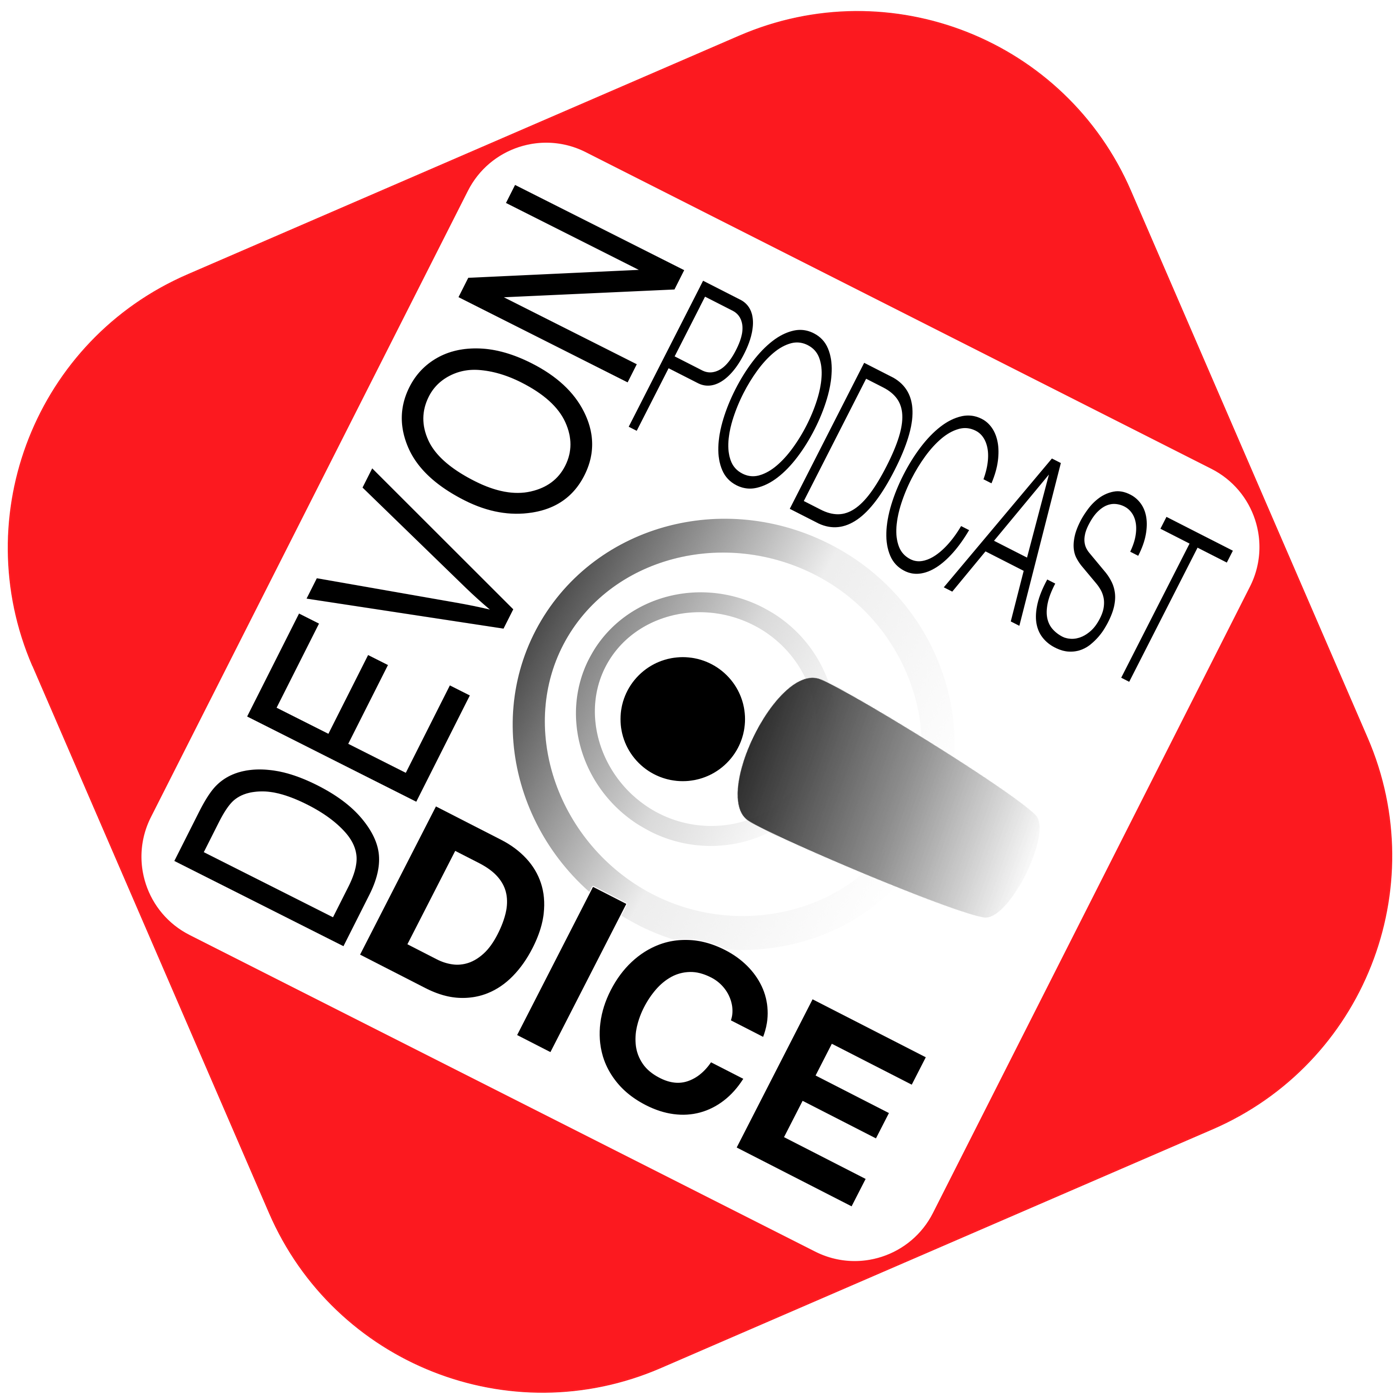 6. Devon Dice podcast, The Castles of Burgundy review